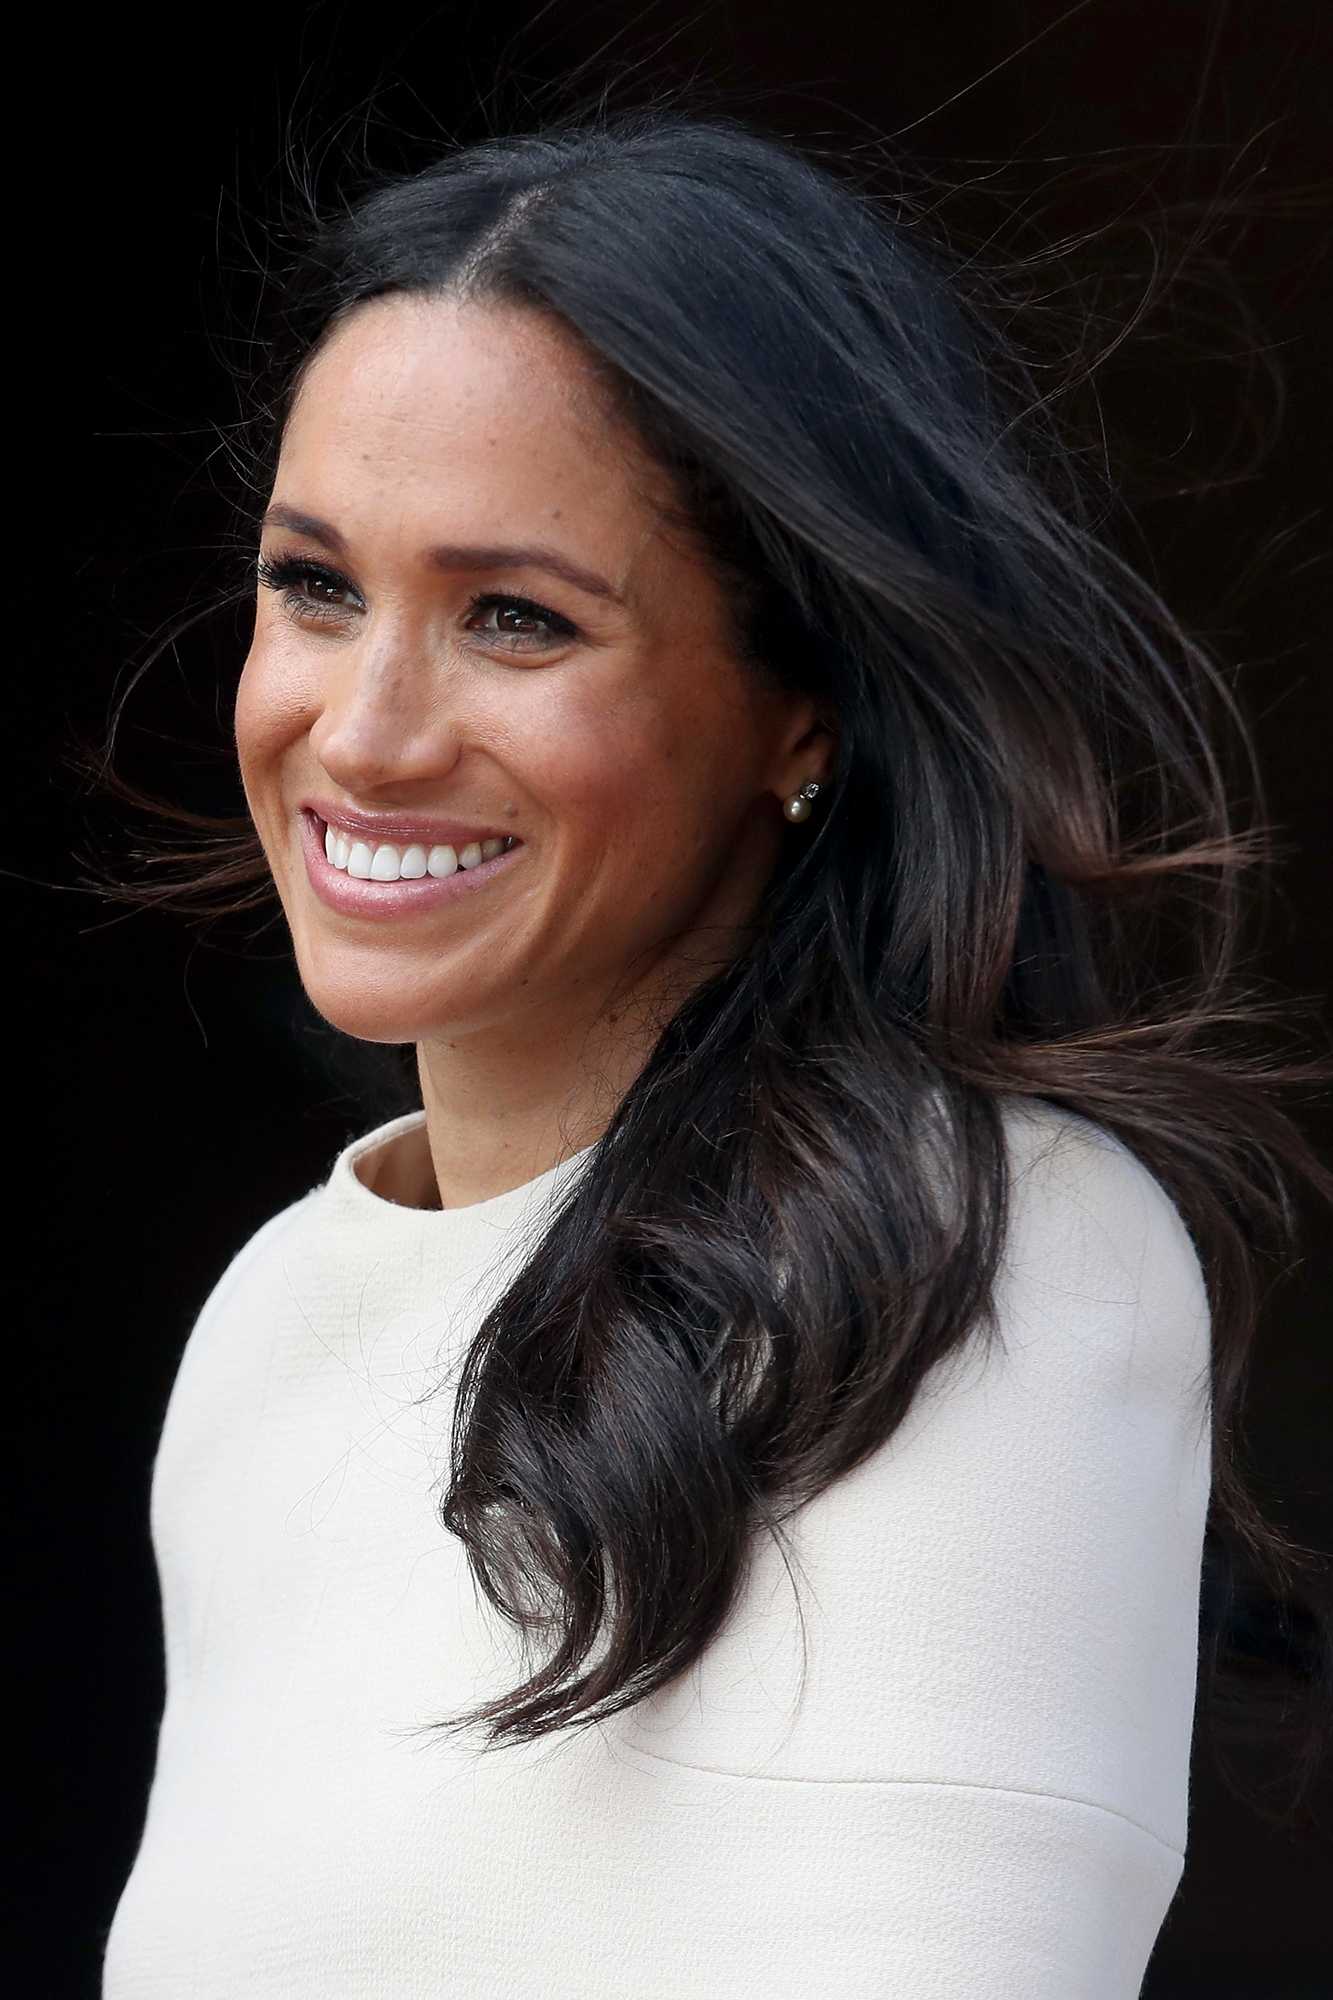 70+ Hot Pictures Of Meghan Markle Which Are Just Too Hot To Handle 3